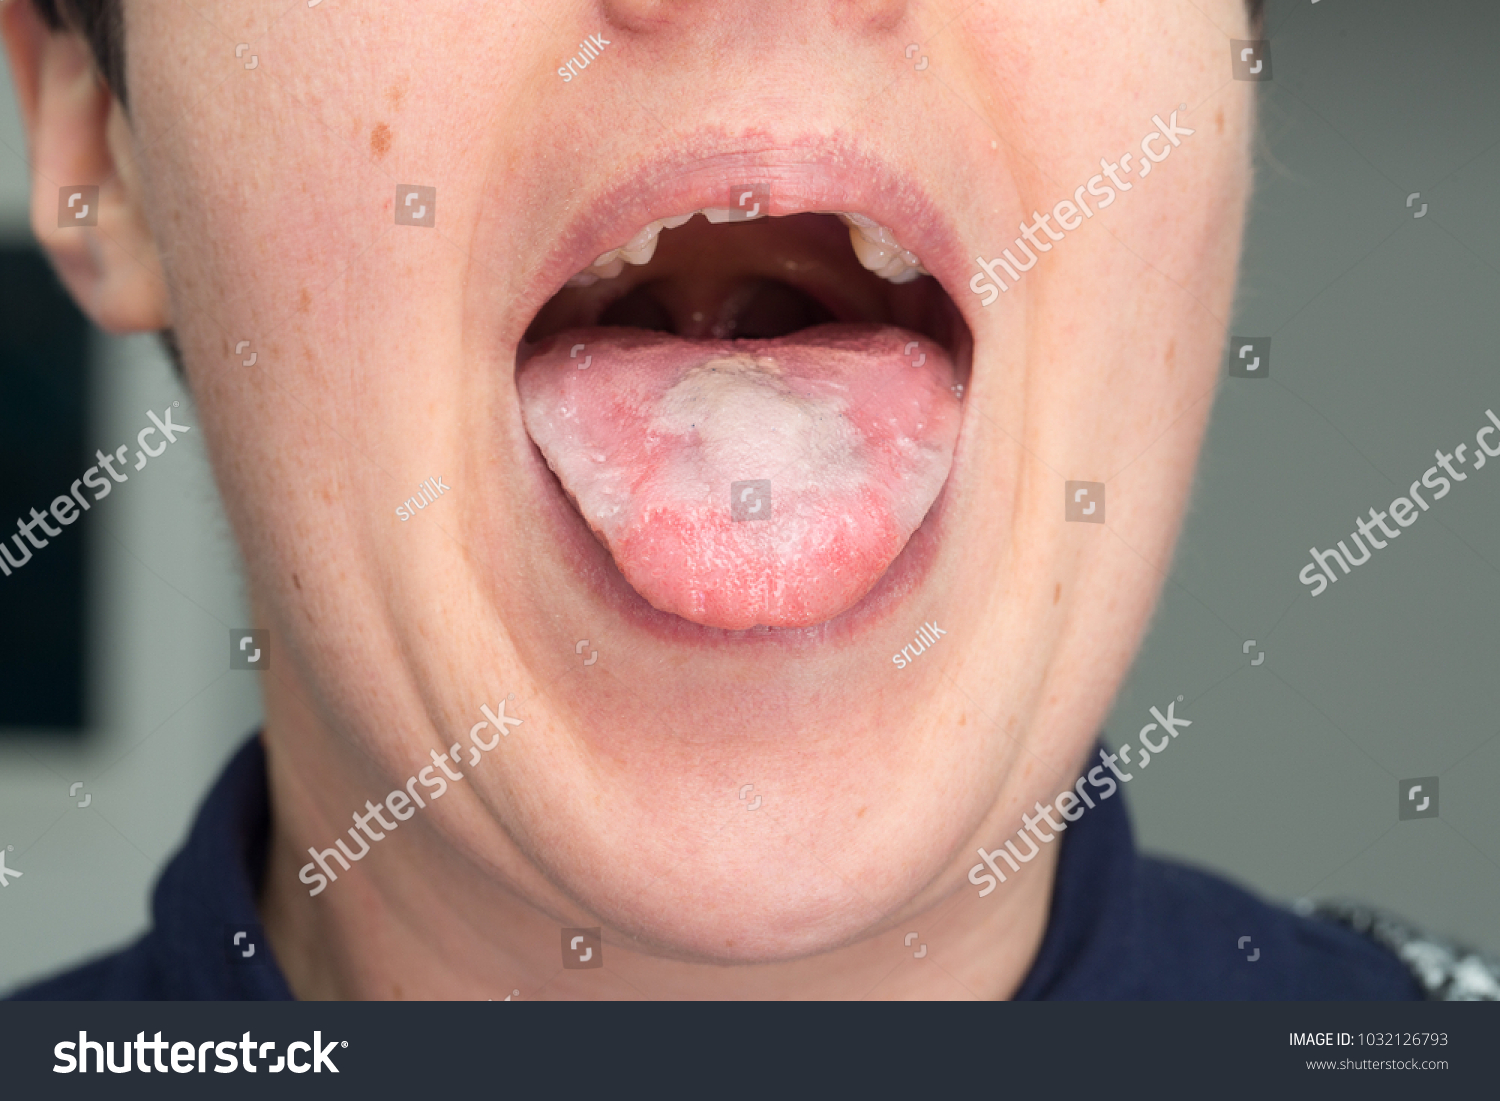 Close Tongue Infected By Candida Albicans Stock Photo Edit Now 1032126793